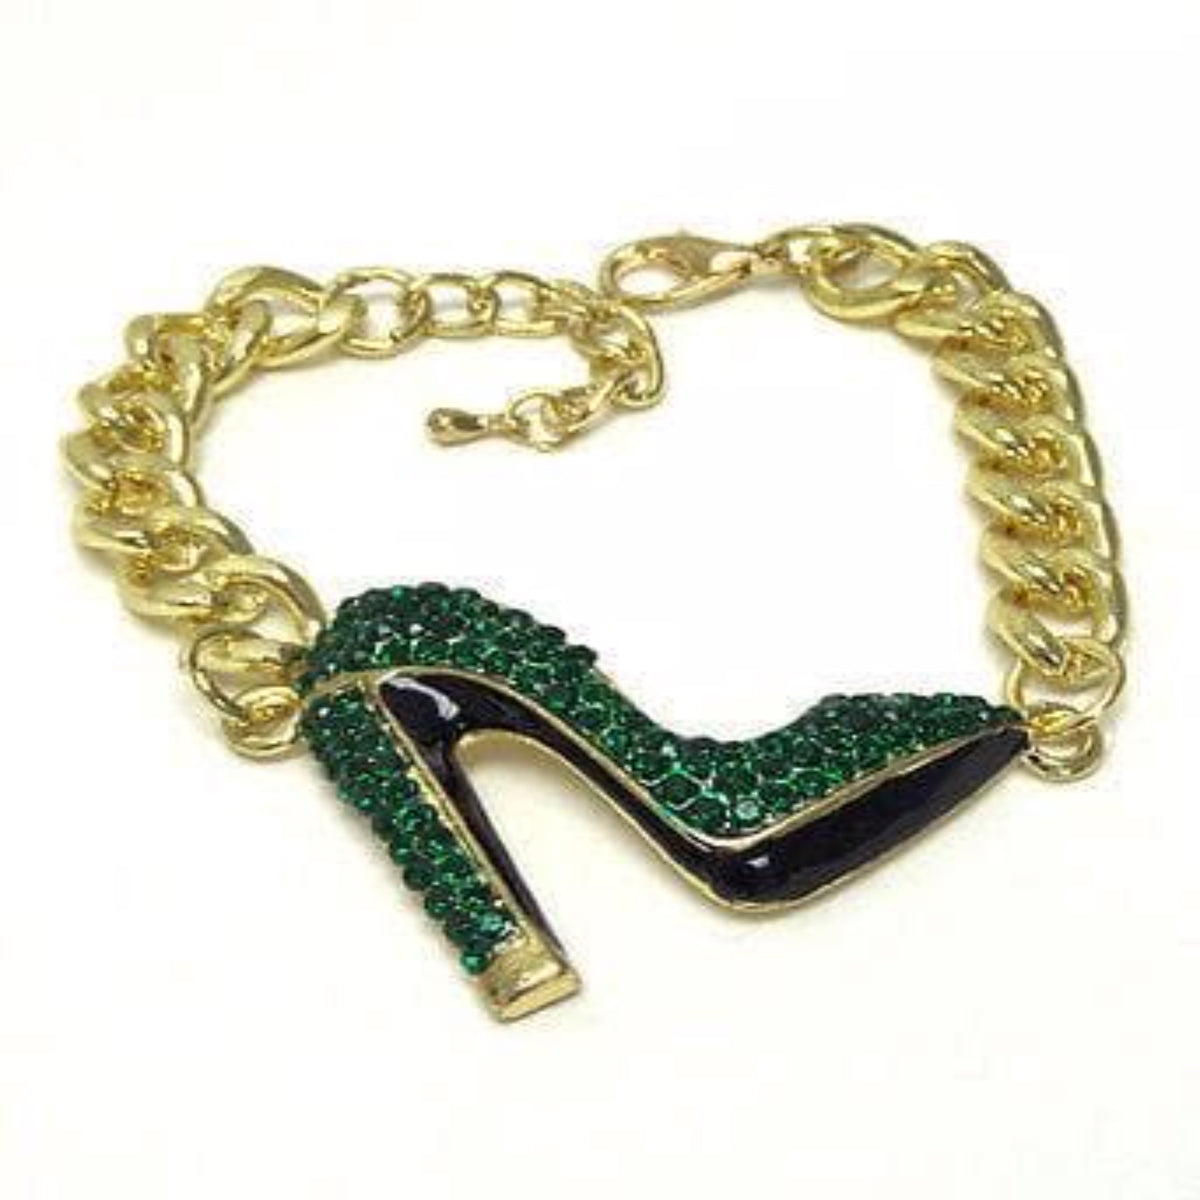 Green Crystal high heel and thick gold chain bracelet - The House of Awareness